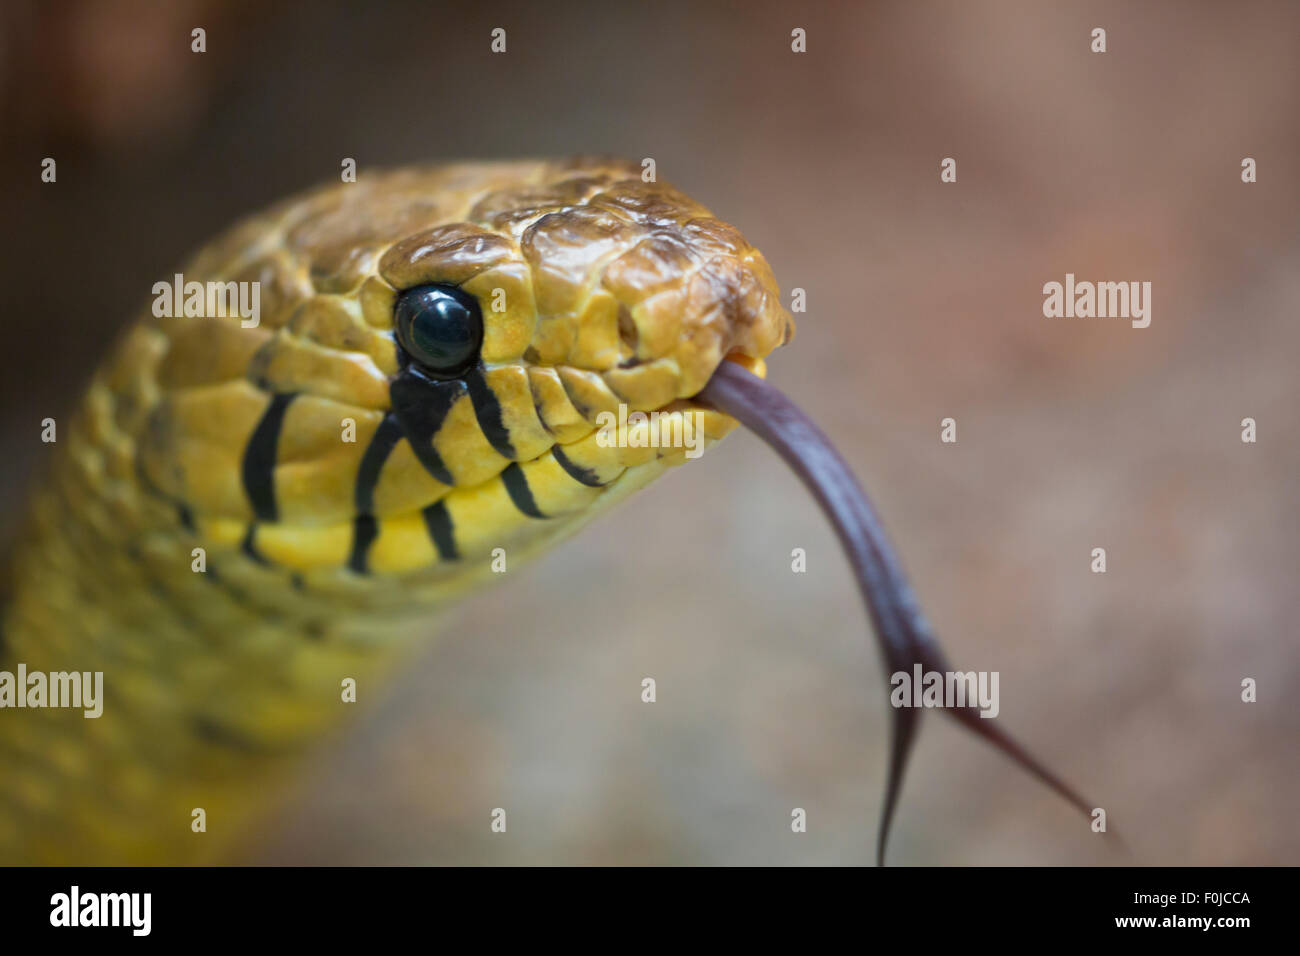 Closeup of yellow and black python snake head found in Costa Rica Stock Photo